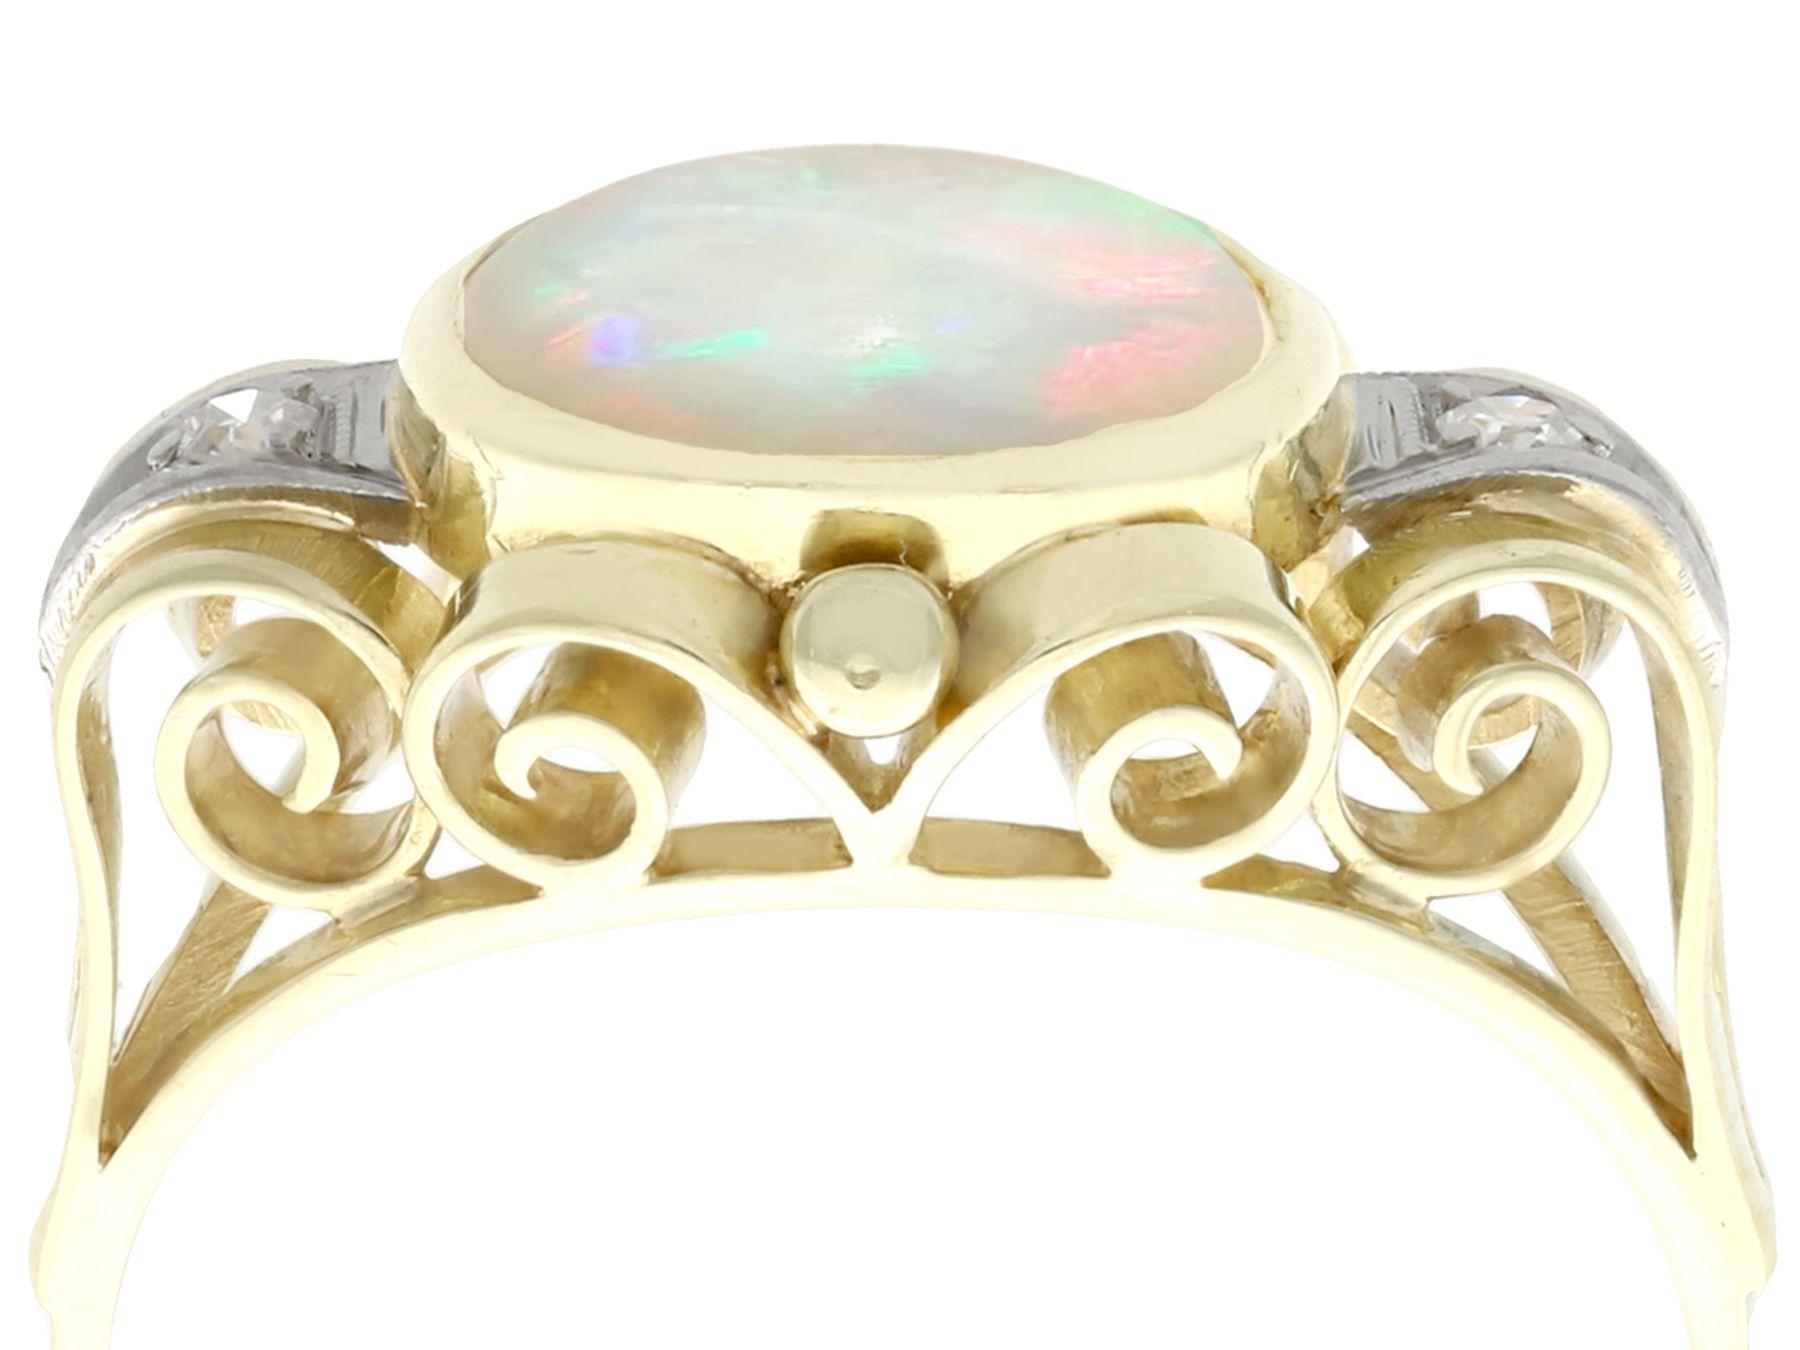 An impressive vintage 1.10 carat opal and 0.04 carat diamond, 14 karat yellow gold and 14 karat white gold set cocktail ring; part of our diverse gemstone jewelry collections

This fine and impressive cabochon cut opal and diamond cocktail ring has